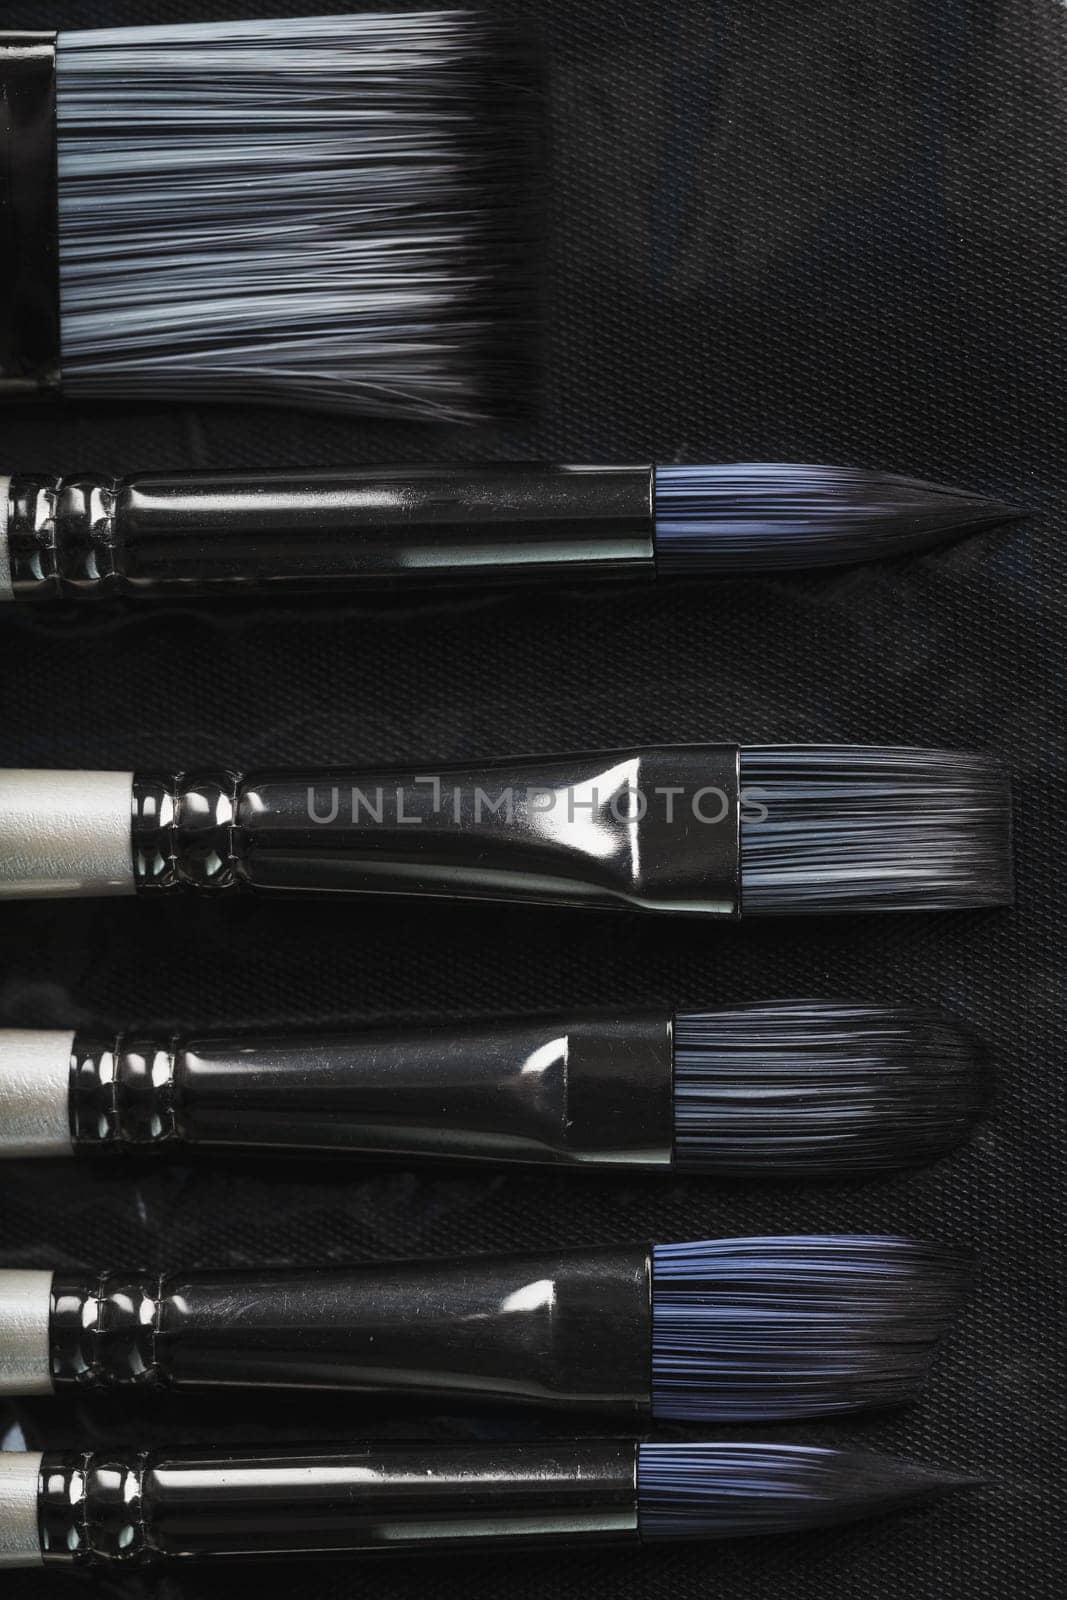 A set of art brushes for drawing on a black background, Close-up